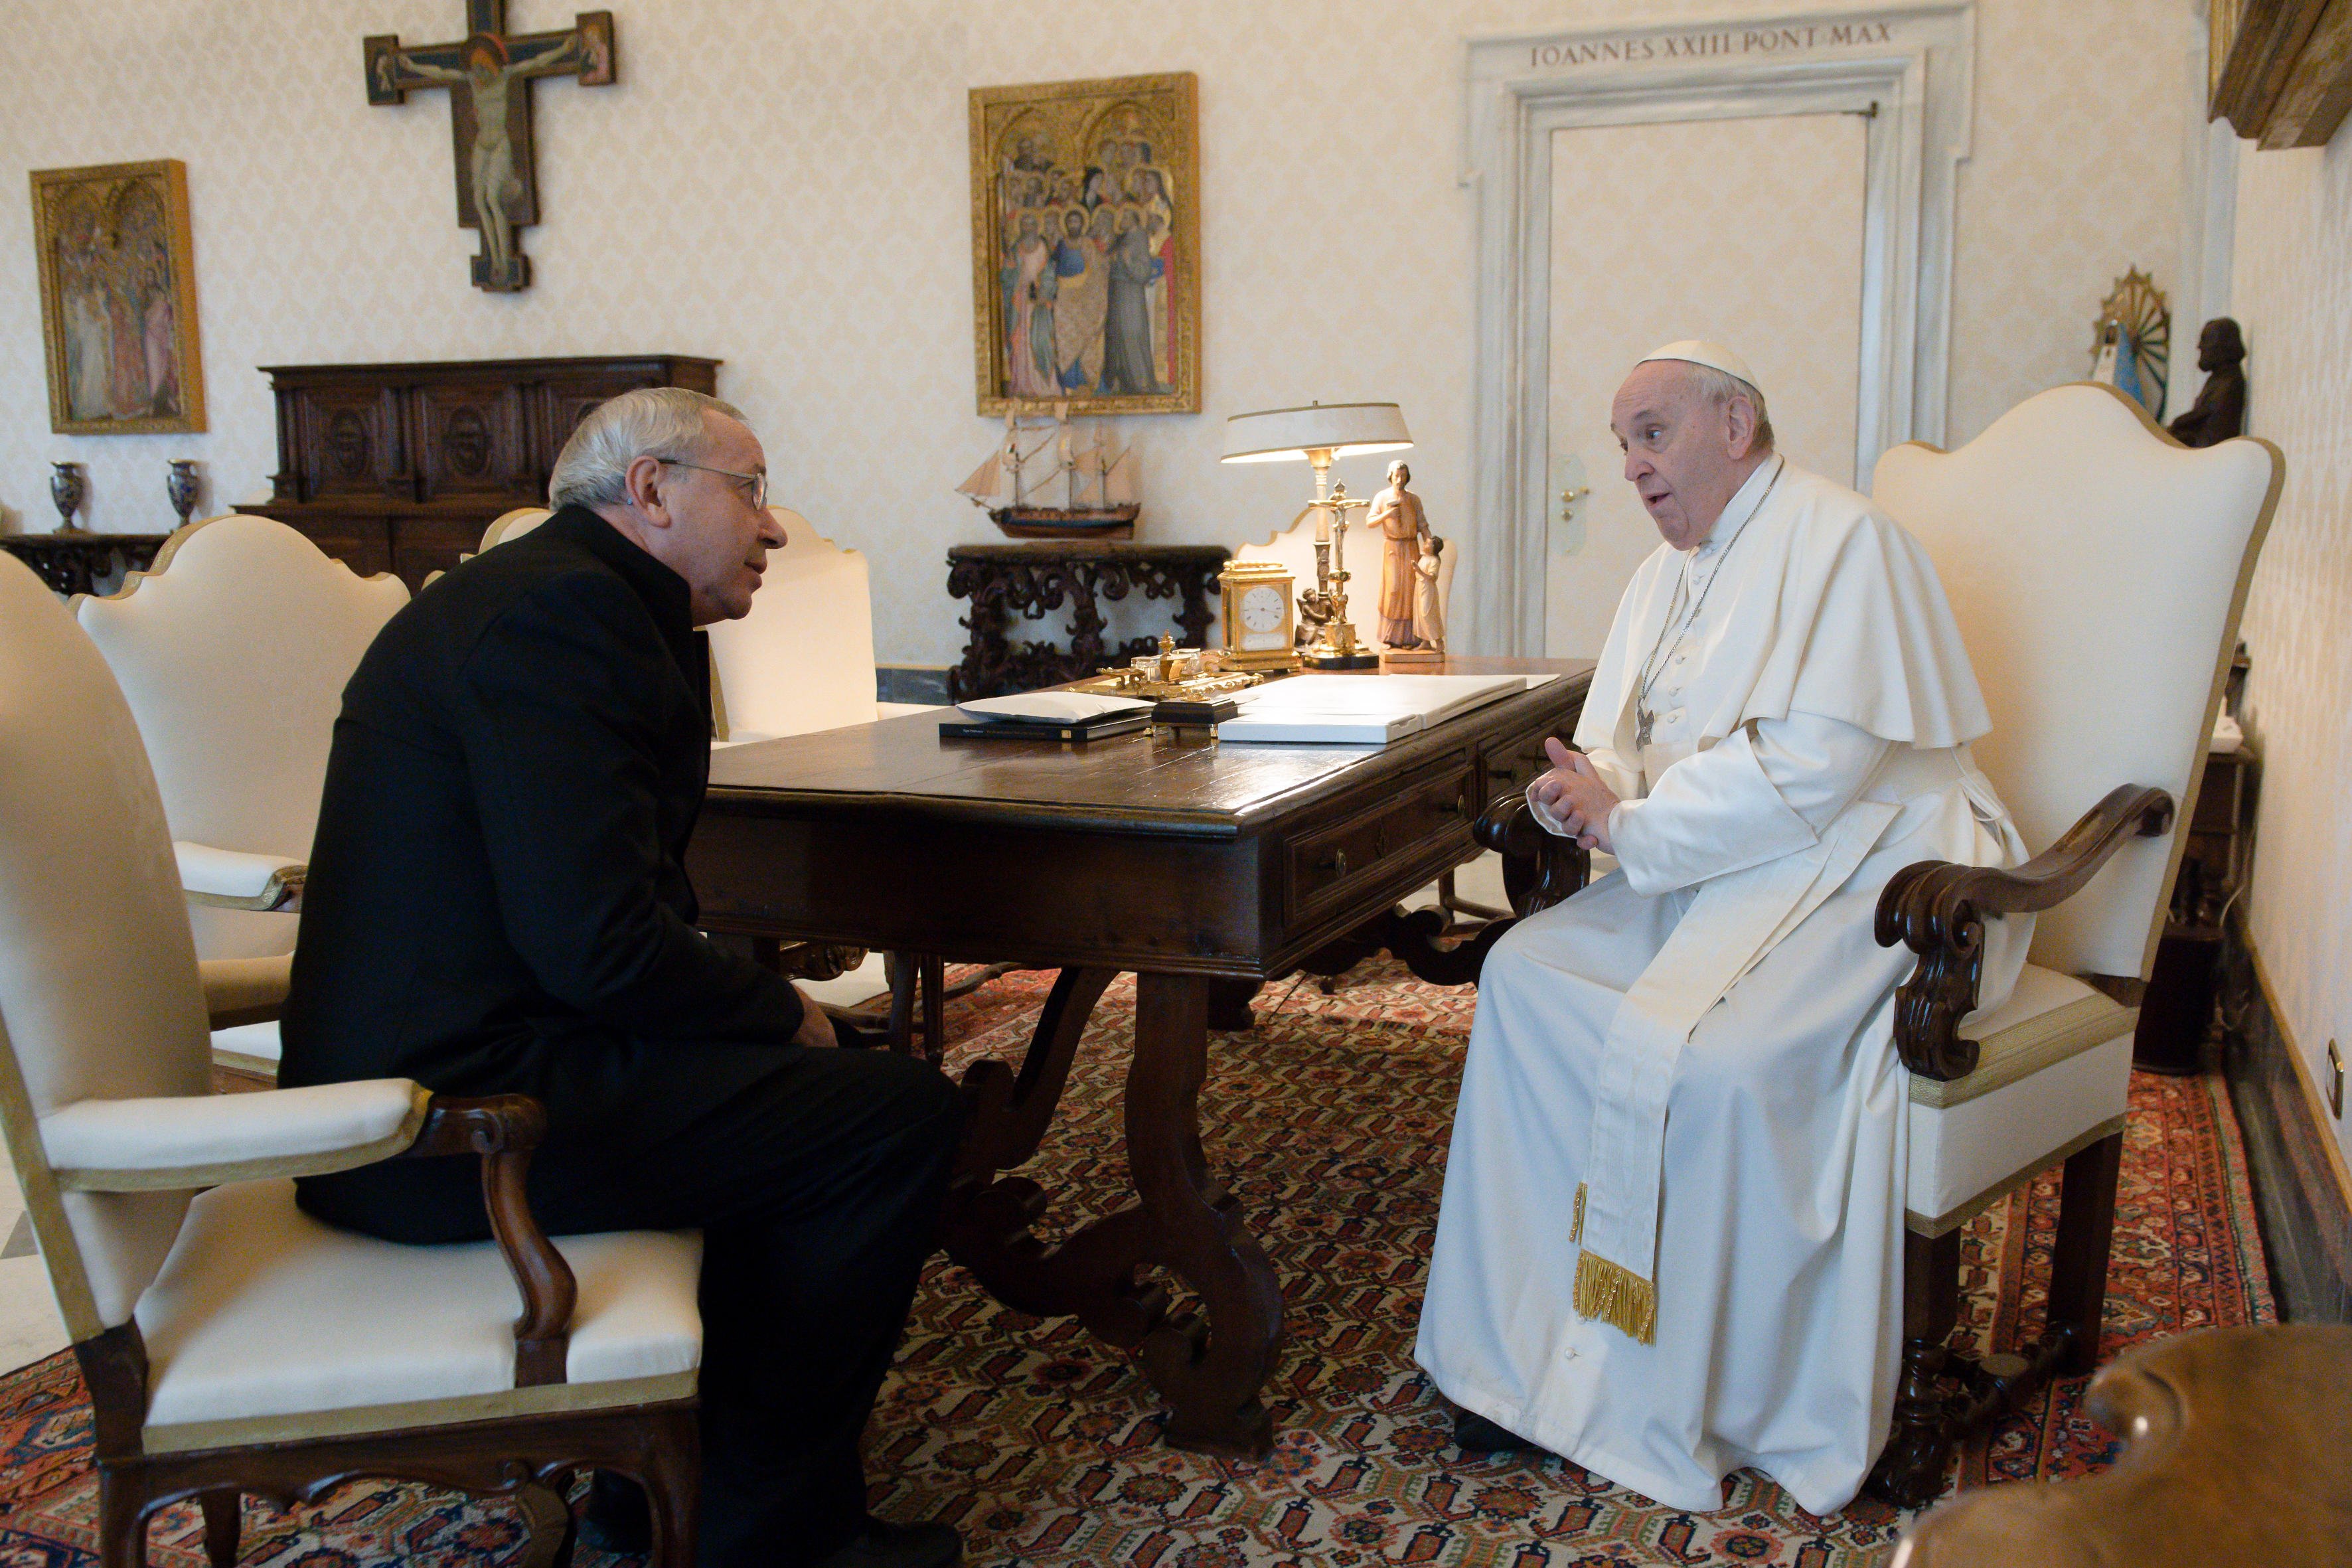 Pope Francis greets Jesuit Father Marko Rupnik during a private audience at the Vatican in this Jan. 3, 2022, file photo. Father Rupnik, whose mosaics decorate chapels in the Vatican, all over Europe, in the United States and Australia, is under restricted ministry after being accused of abusing adult nuns in Slovenia. (CNS photo/Vatican Media)